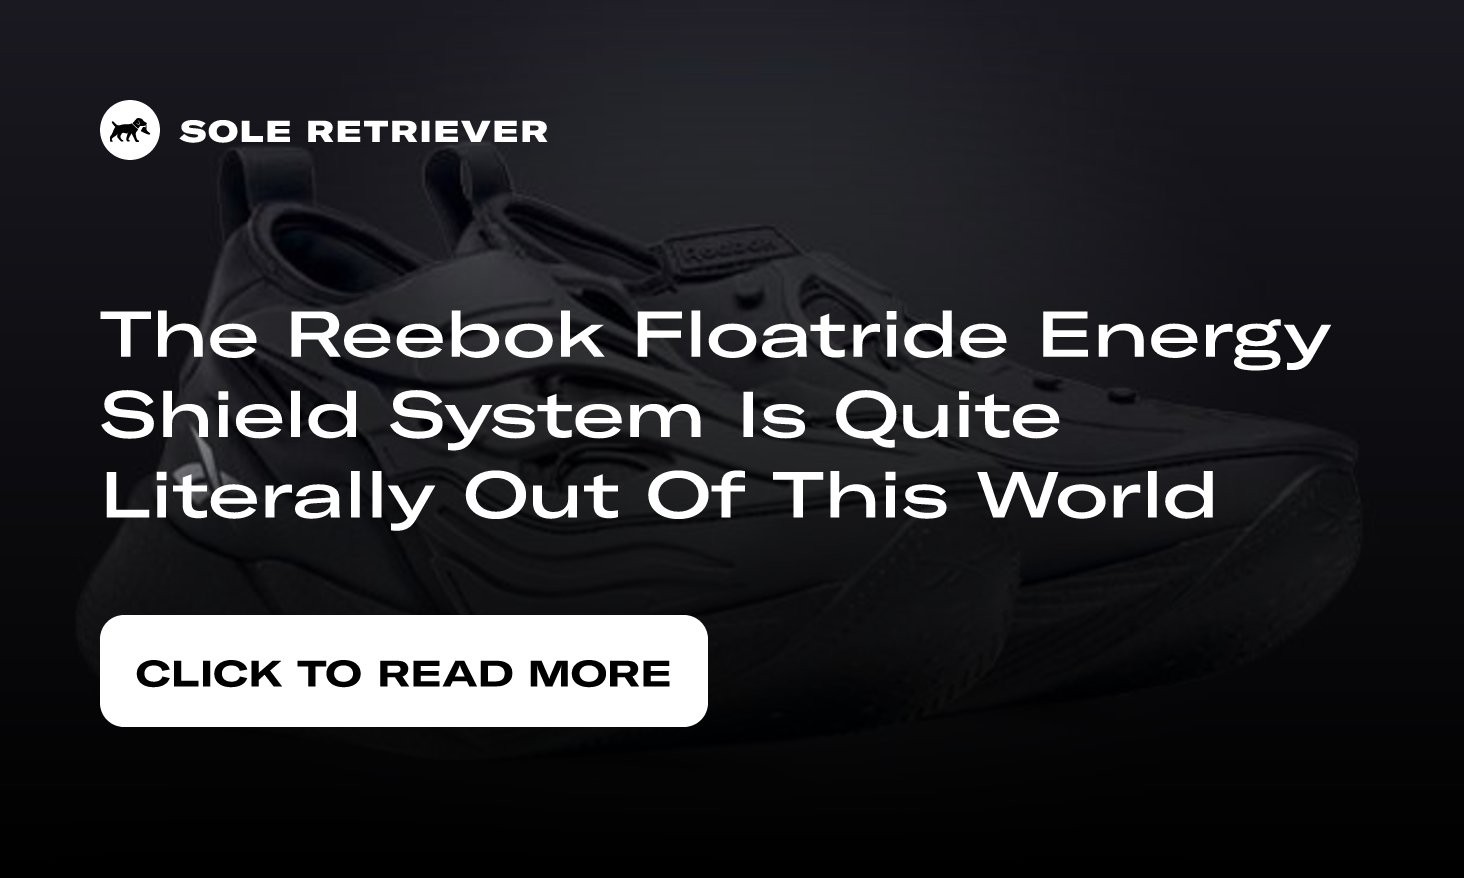 The Reebok Floatride Energy Shield System Is Quite Literally Out Of